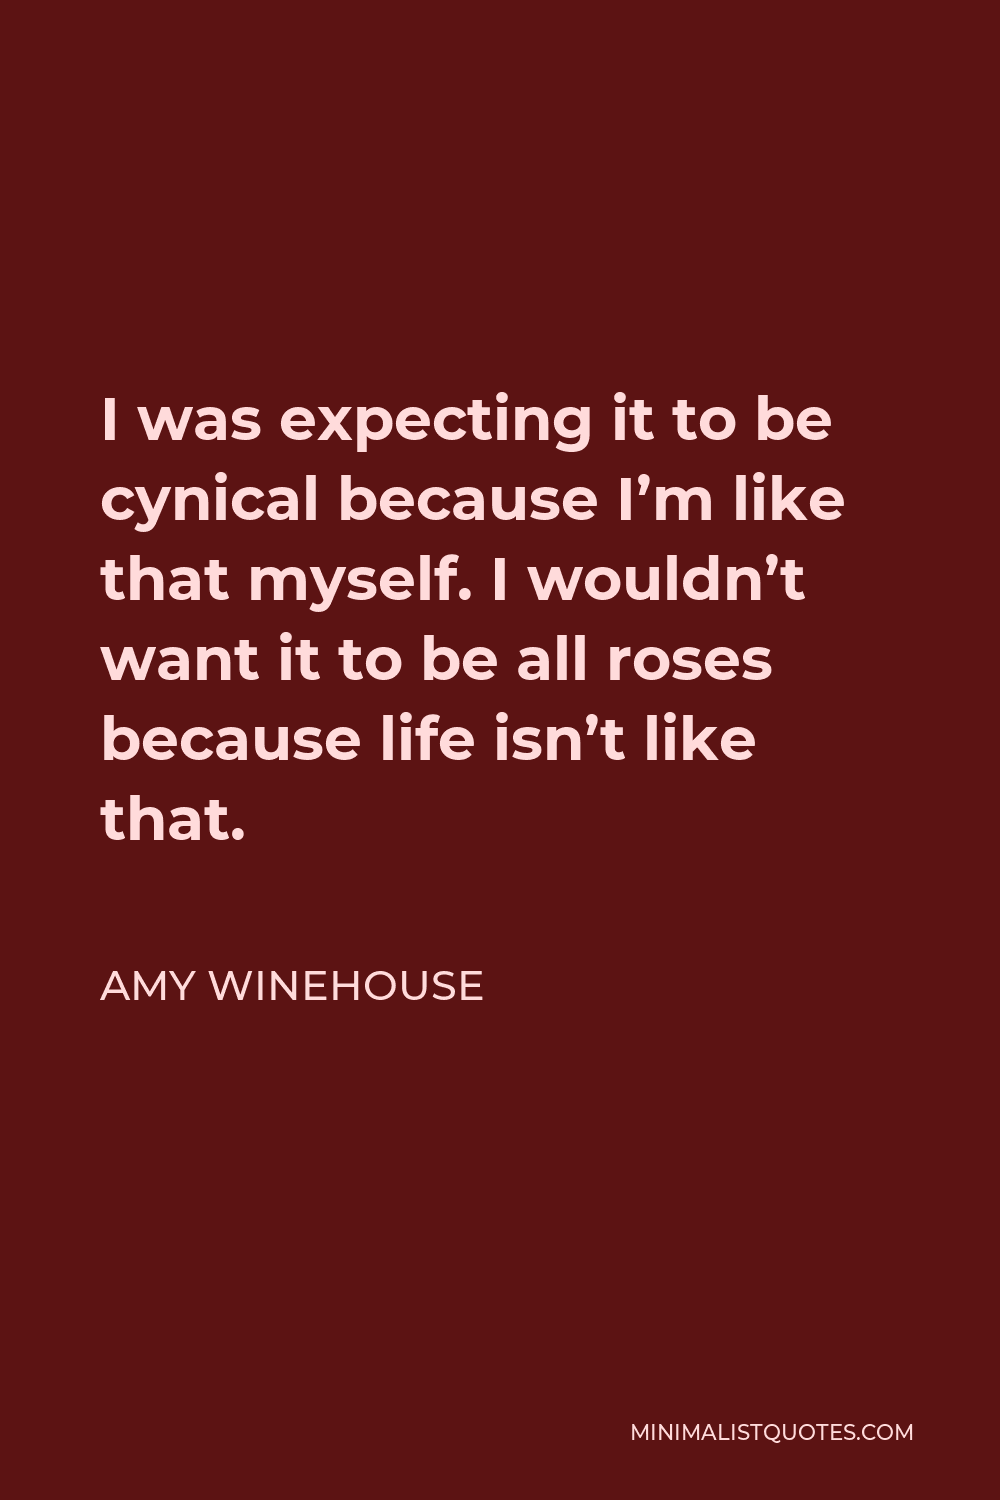 Amy Winehouse Quote - I was expecting it to be cynical because I’m like that myself. I wouldn’t want it to be all roses because life isn’t like that.